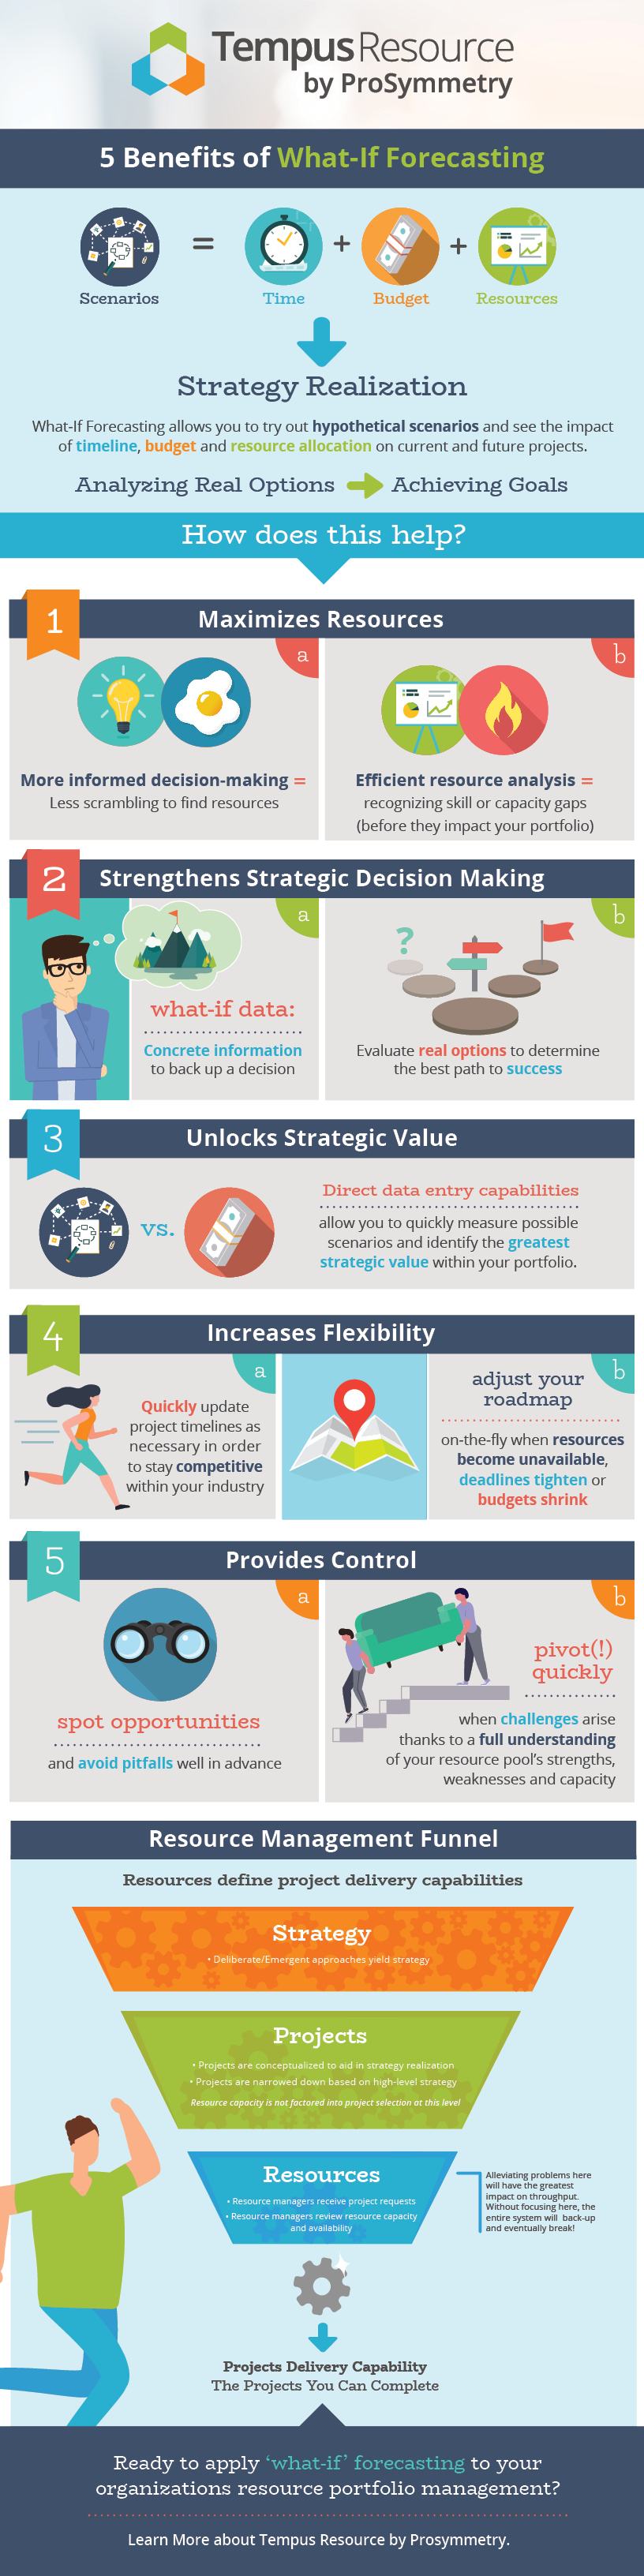 5-Benefits-of-What-If-Forecasting-Infographic